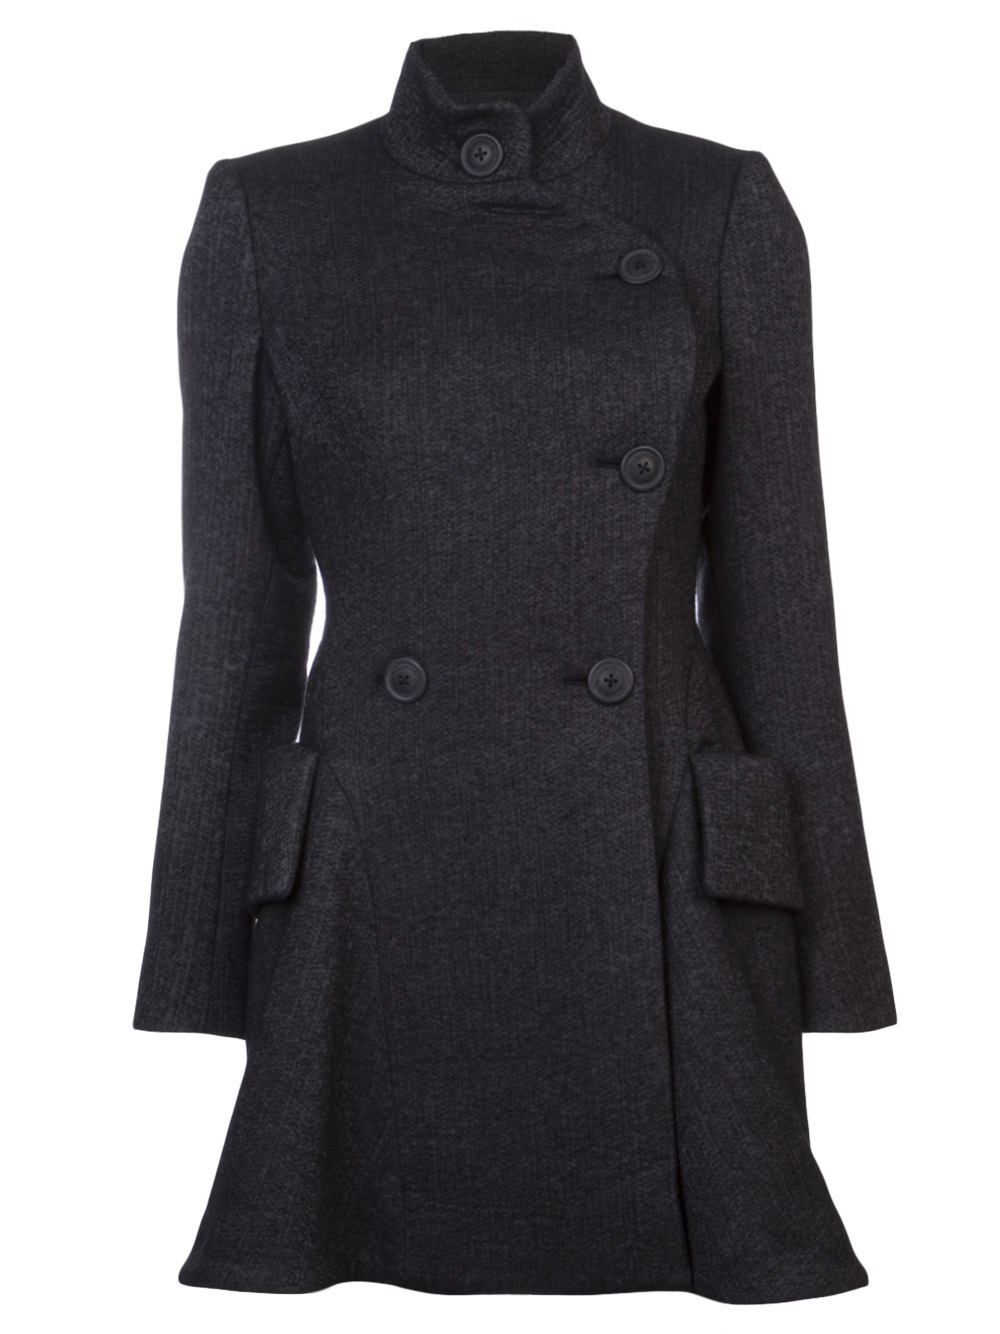 Vivienne Westwood Anglomania Profile Coat in Gray (grey) | Lyst